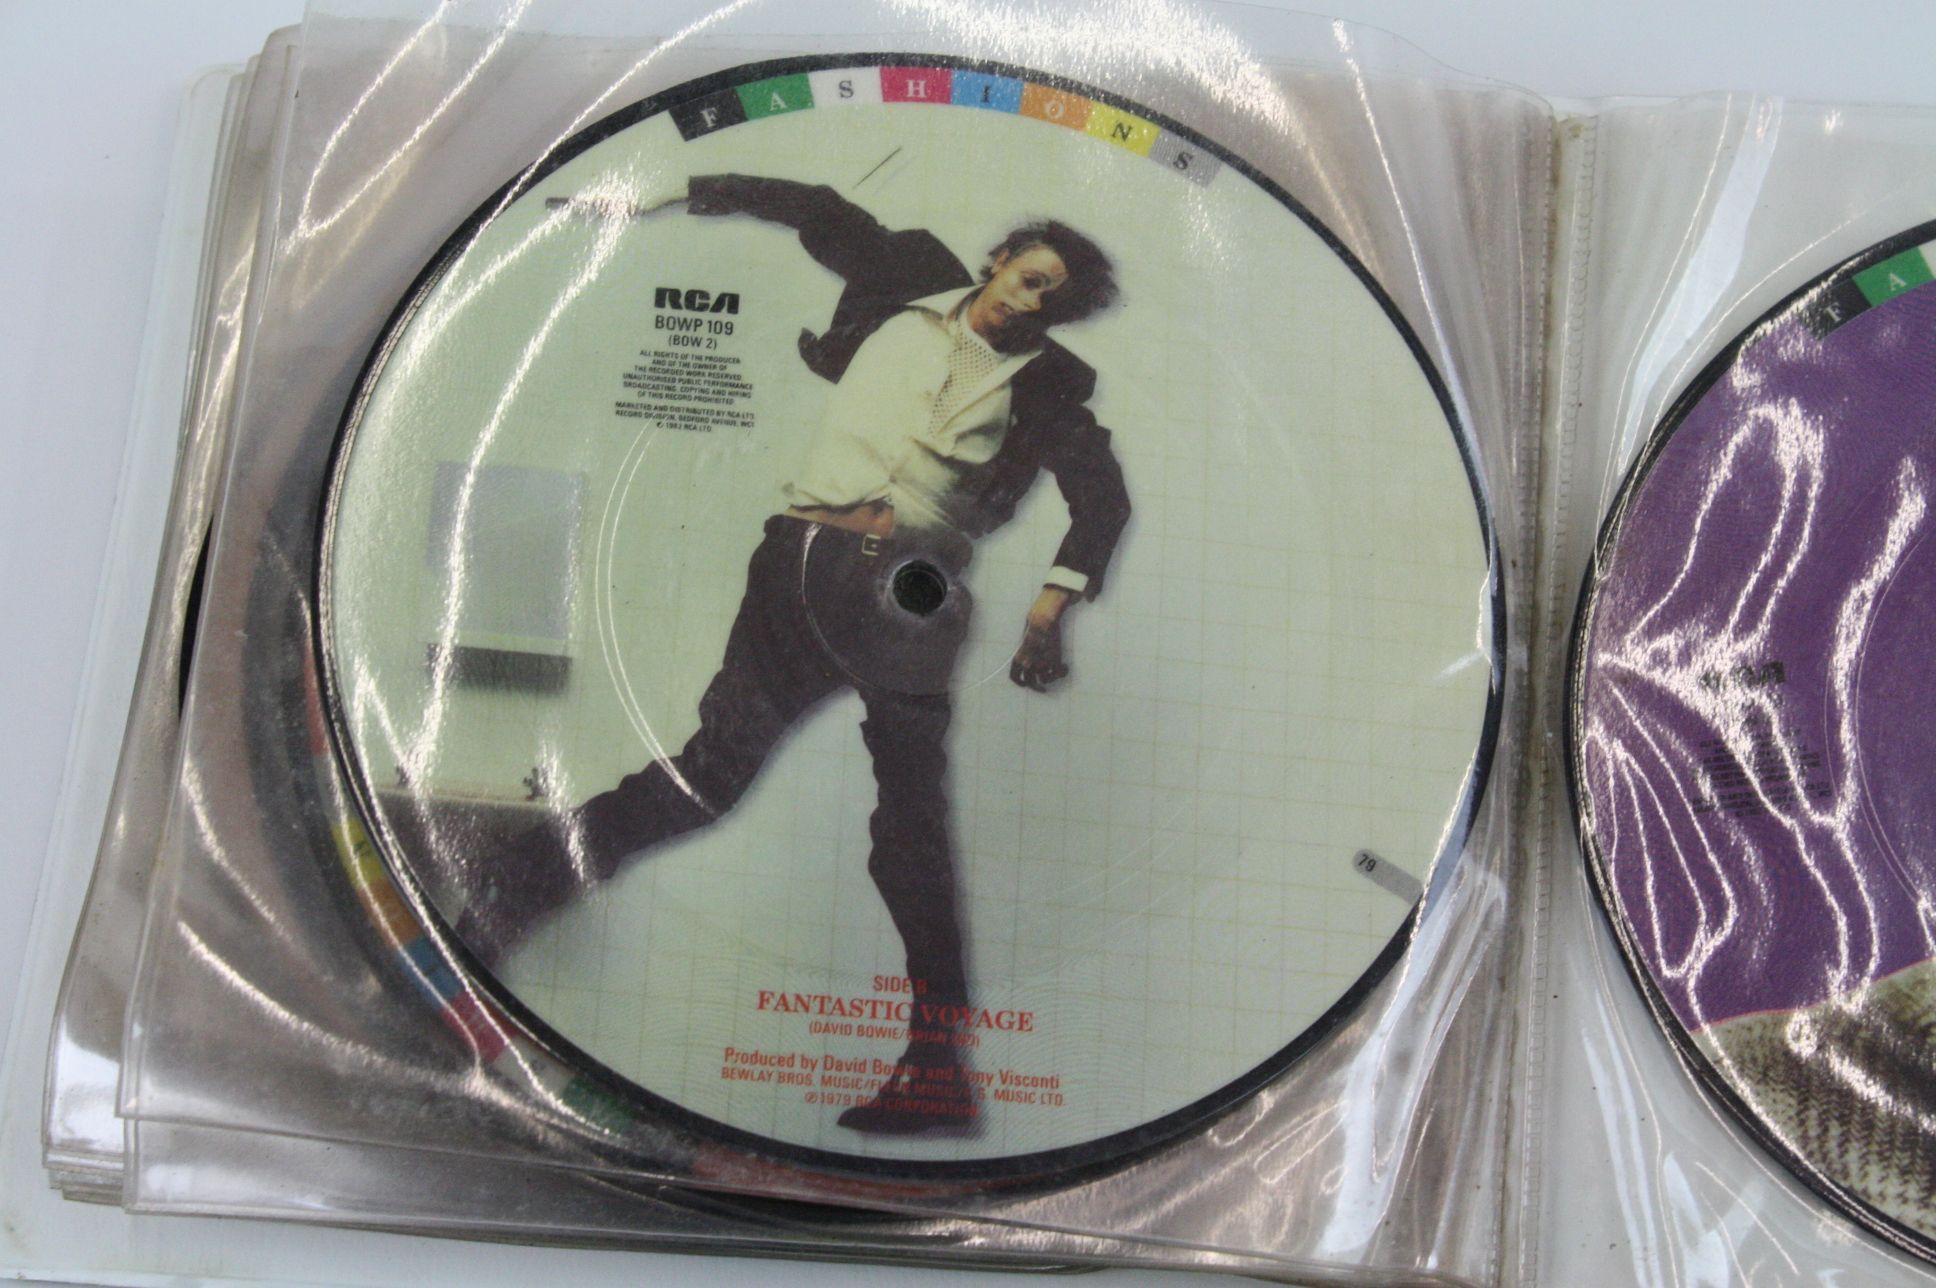 Vinyl - David Bowie Fashions BOW100 set of 10 x 7" picture discs, vg++ - Image 21 of 24